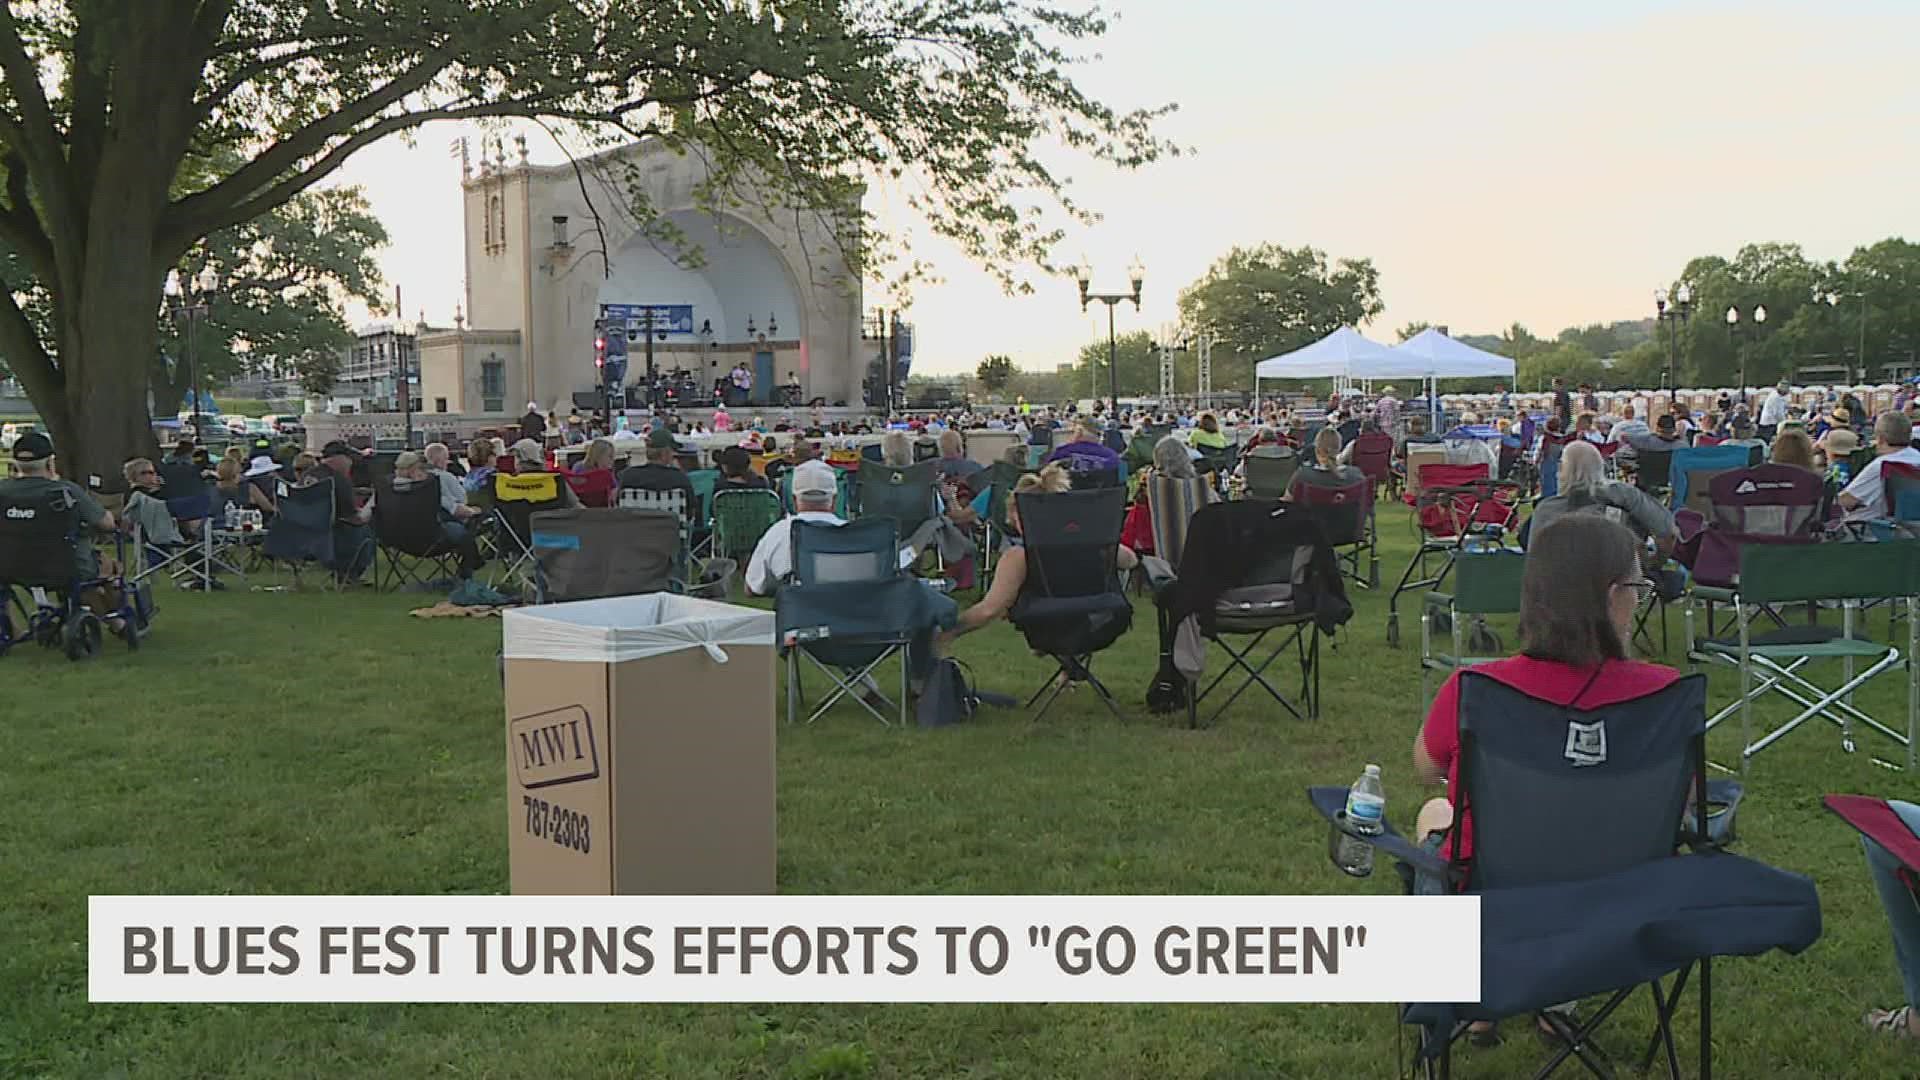 The festival took place in Davenport's LeClaire Park, and had numerous receptacles placed throughout the park to keep beverage bottles off the ground.